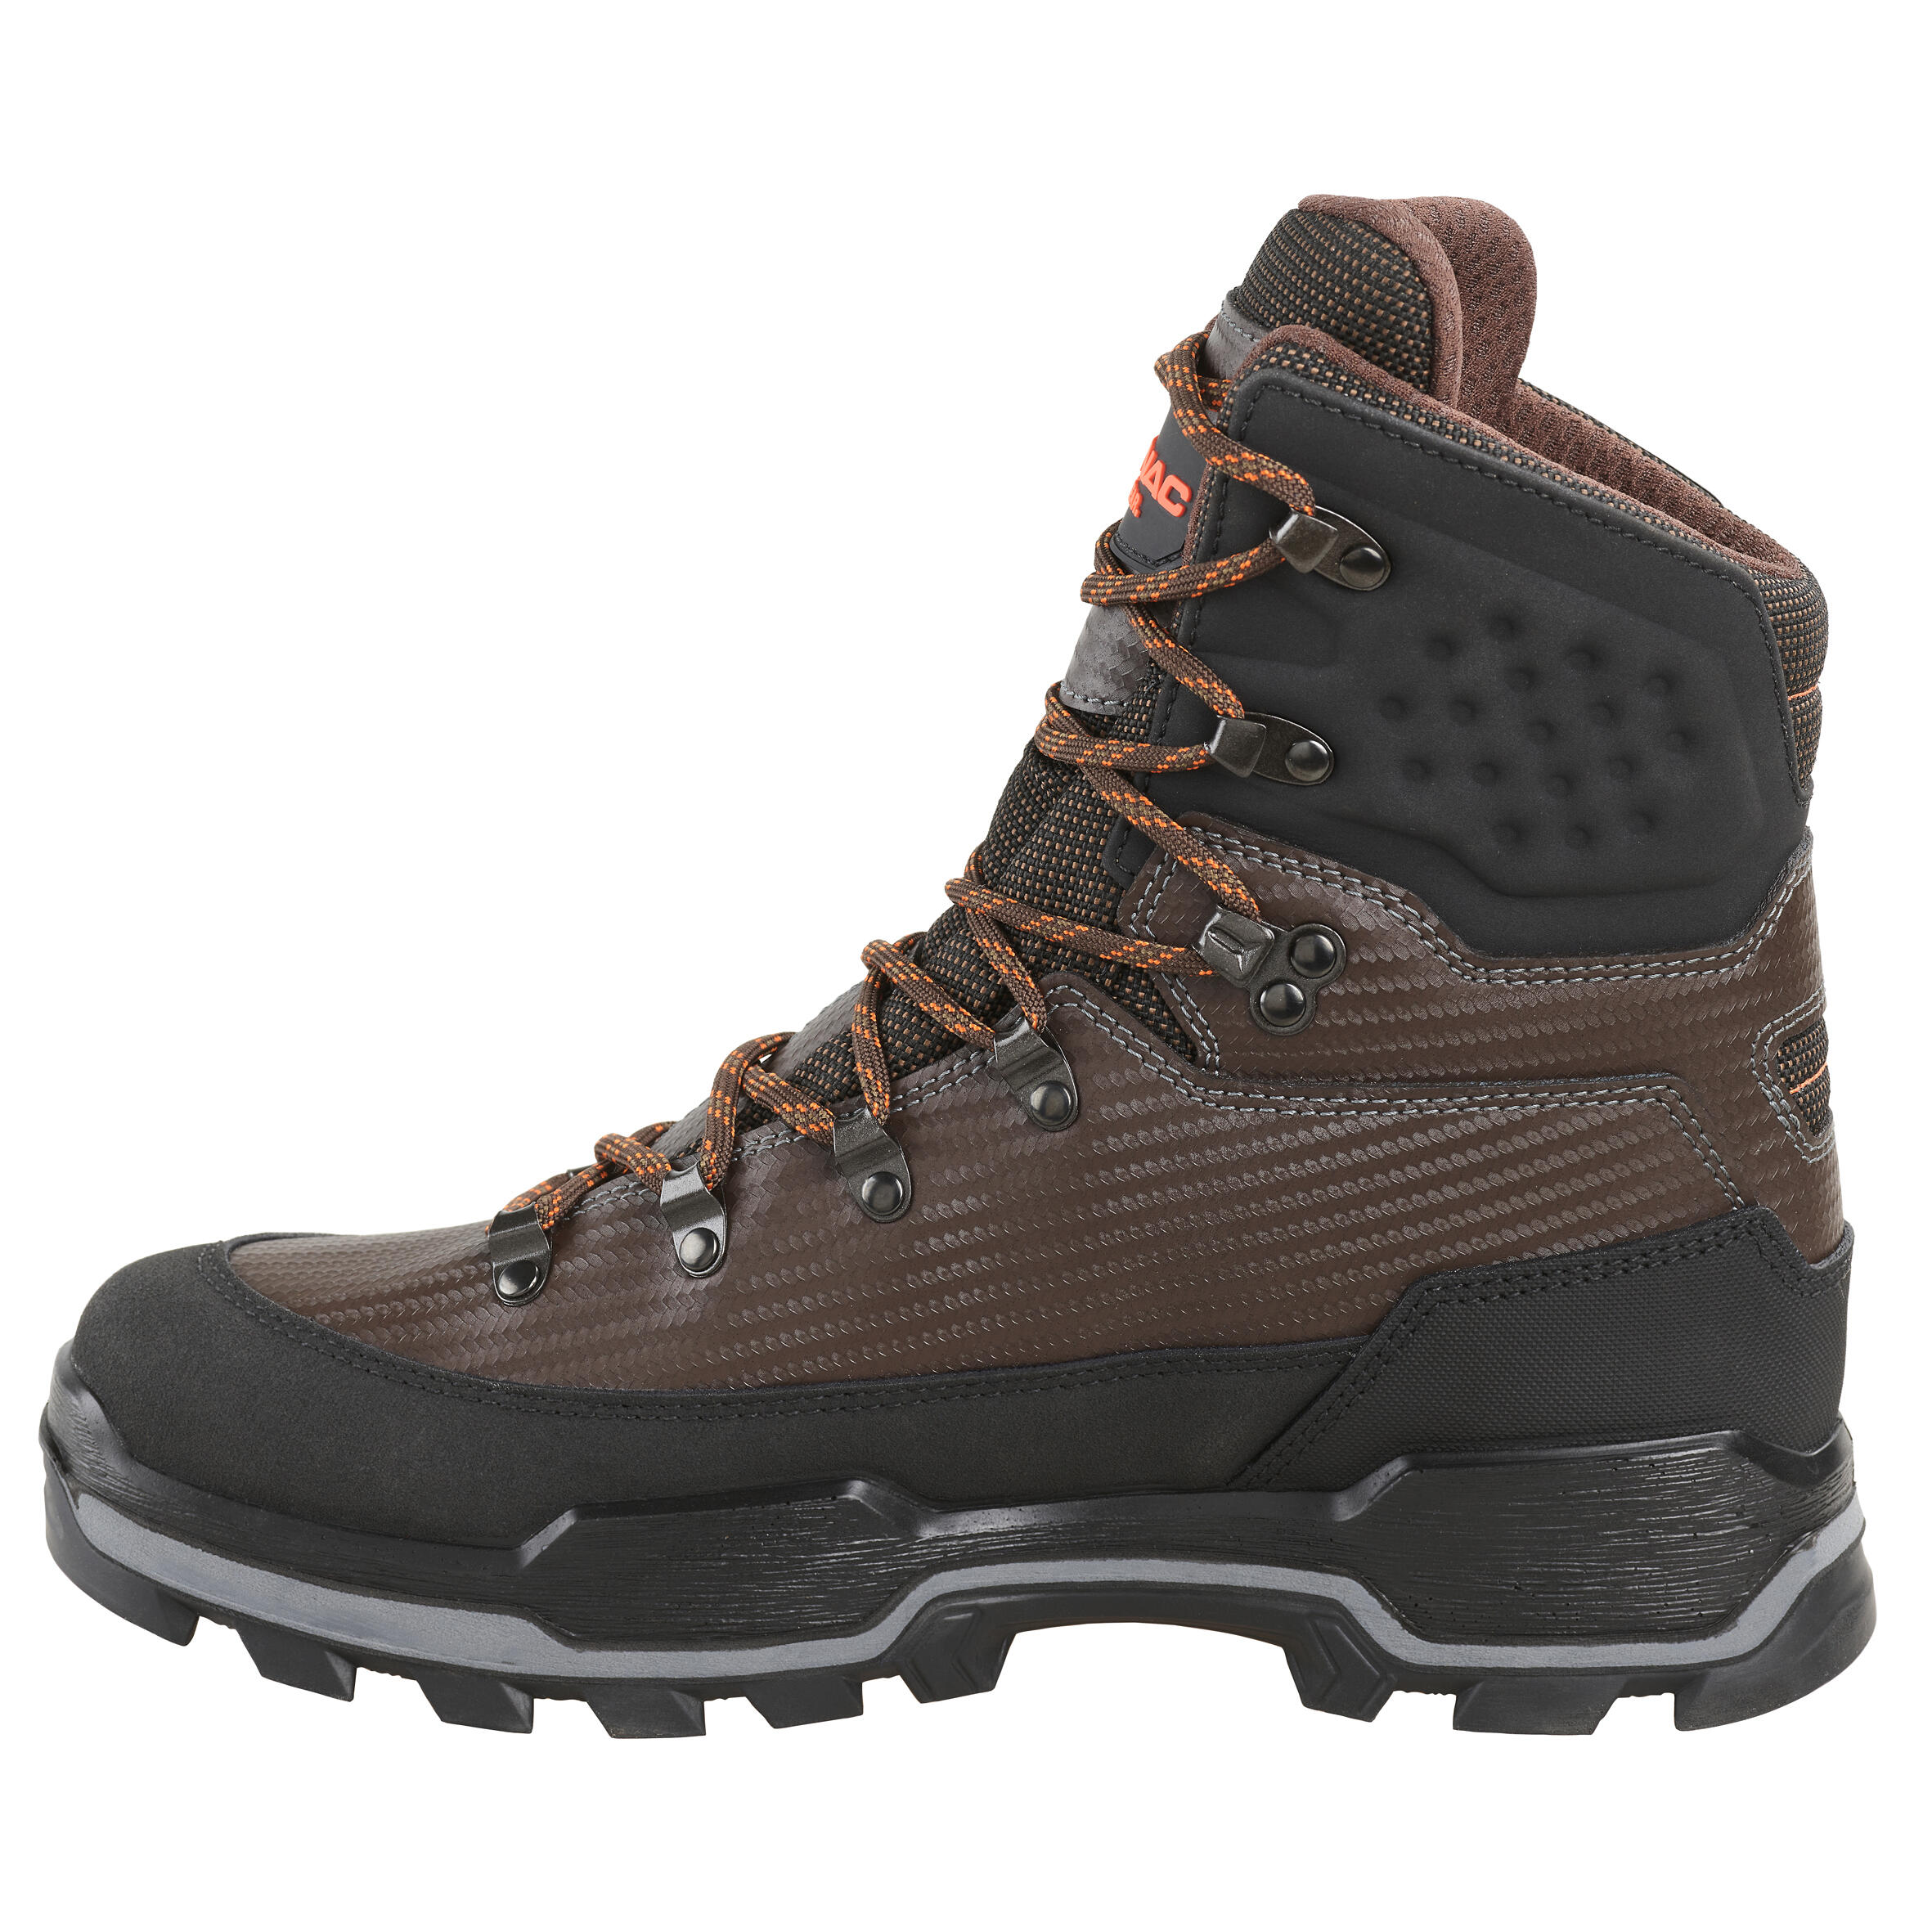 WATERPROOF AND ROBUST HUNTING BOOTS CROSSHUNT 900 - BROWN V2 2/5